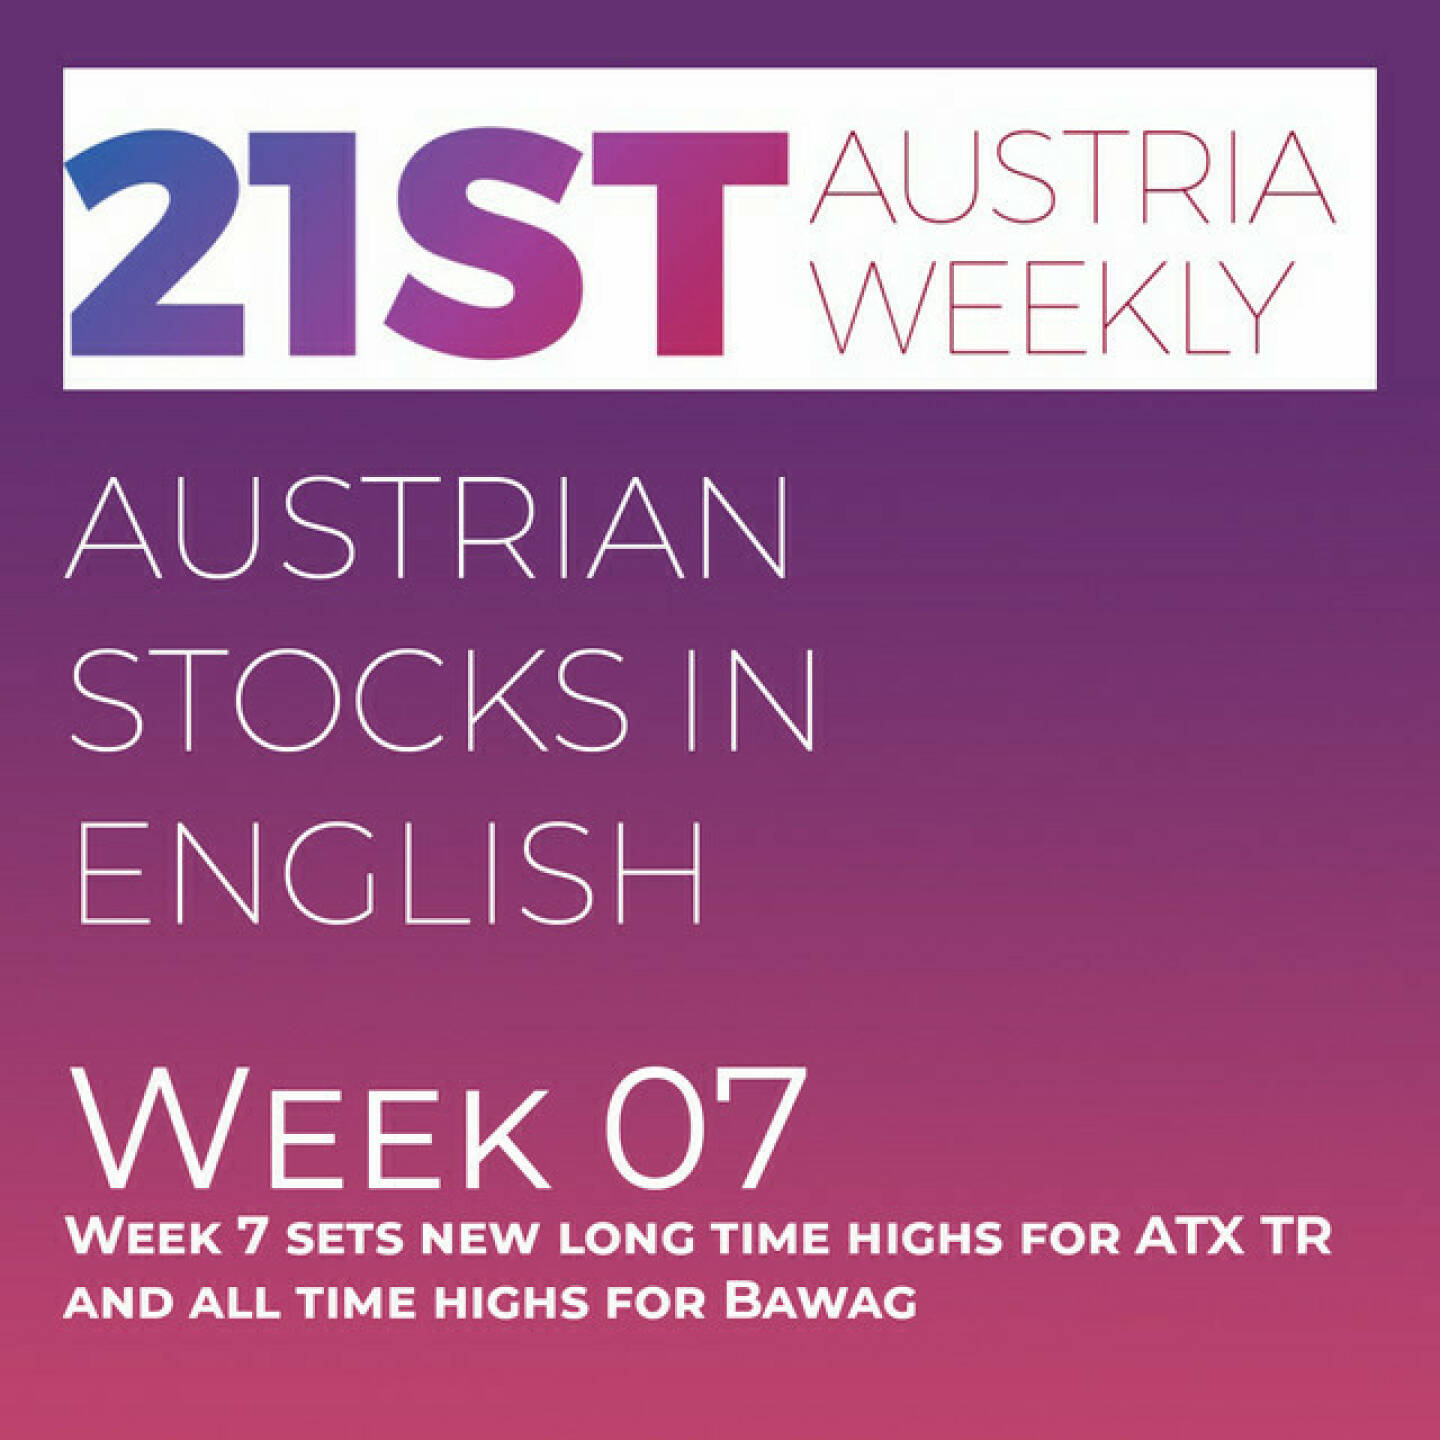 https://open.spotify.com/episode/30cyuOsE2hegYgYtrrpTEI
Austrian Stocks in English: Week 7 sets new long time highs for ATX TR and all time highs for Bawag - <p>Welcome  to &#34;Austrian Stocks in English - presented by Palfinger&#34;, the english spoken weekly Summary for the Austrian Stock Market,  positioned every Sunday in the mostly german languaged Podcast &#34;Audio-CD.at Indie Podcasts&#34;- Wiener Börse, Sport Musik und Mehr“ .<br/><br/>The following script is based on our 21st Austria weekly and Week 7 was another very good week for ATX TR, setting new Highs for 12 Months, the Index went up 1,51% to 7.380,8 points. Bawag even managed three consecutive All time Highs, but Bestperformers were others: Frequentis, Telekom Austria and AT&amp;S. News came from Bawag, Valneva, Lenzing, Vienna Airport, A1 Telekom Austria, Marinomed, Amag, Uniqa, DO &amp; CO, Strabag, Rosenbauer, Wolford and Andritz, these news spoken by the absolutely smart Allison.<br/><br/>Please rate my Podcast on Apple Podcasts (or Spotify): <a href=https://podcasts.apple.com/at/podcast/audio-cd-at-indie-podcasts-wiener-boerse-sport-musik-und-mehr/id1484919130 target=_blank>https://podcasts.apple.com/at/podcast/audio-cd-at-indie-podcasts-wiener-boerse-sport-musik-und-mehr/id1484919130</a> .And please spread the word : <a href=https://www.boerse-social.com/21staustria target=_blank>https://www.boerse-social.com/21staustria</a> - the address to subscribe to the weekly summary as a PDF.</p>